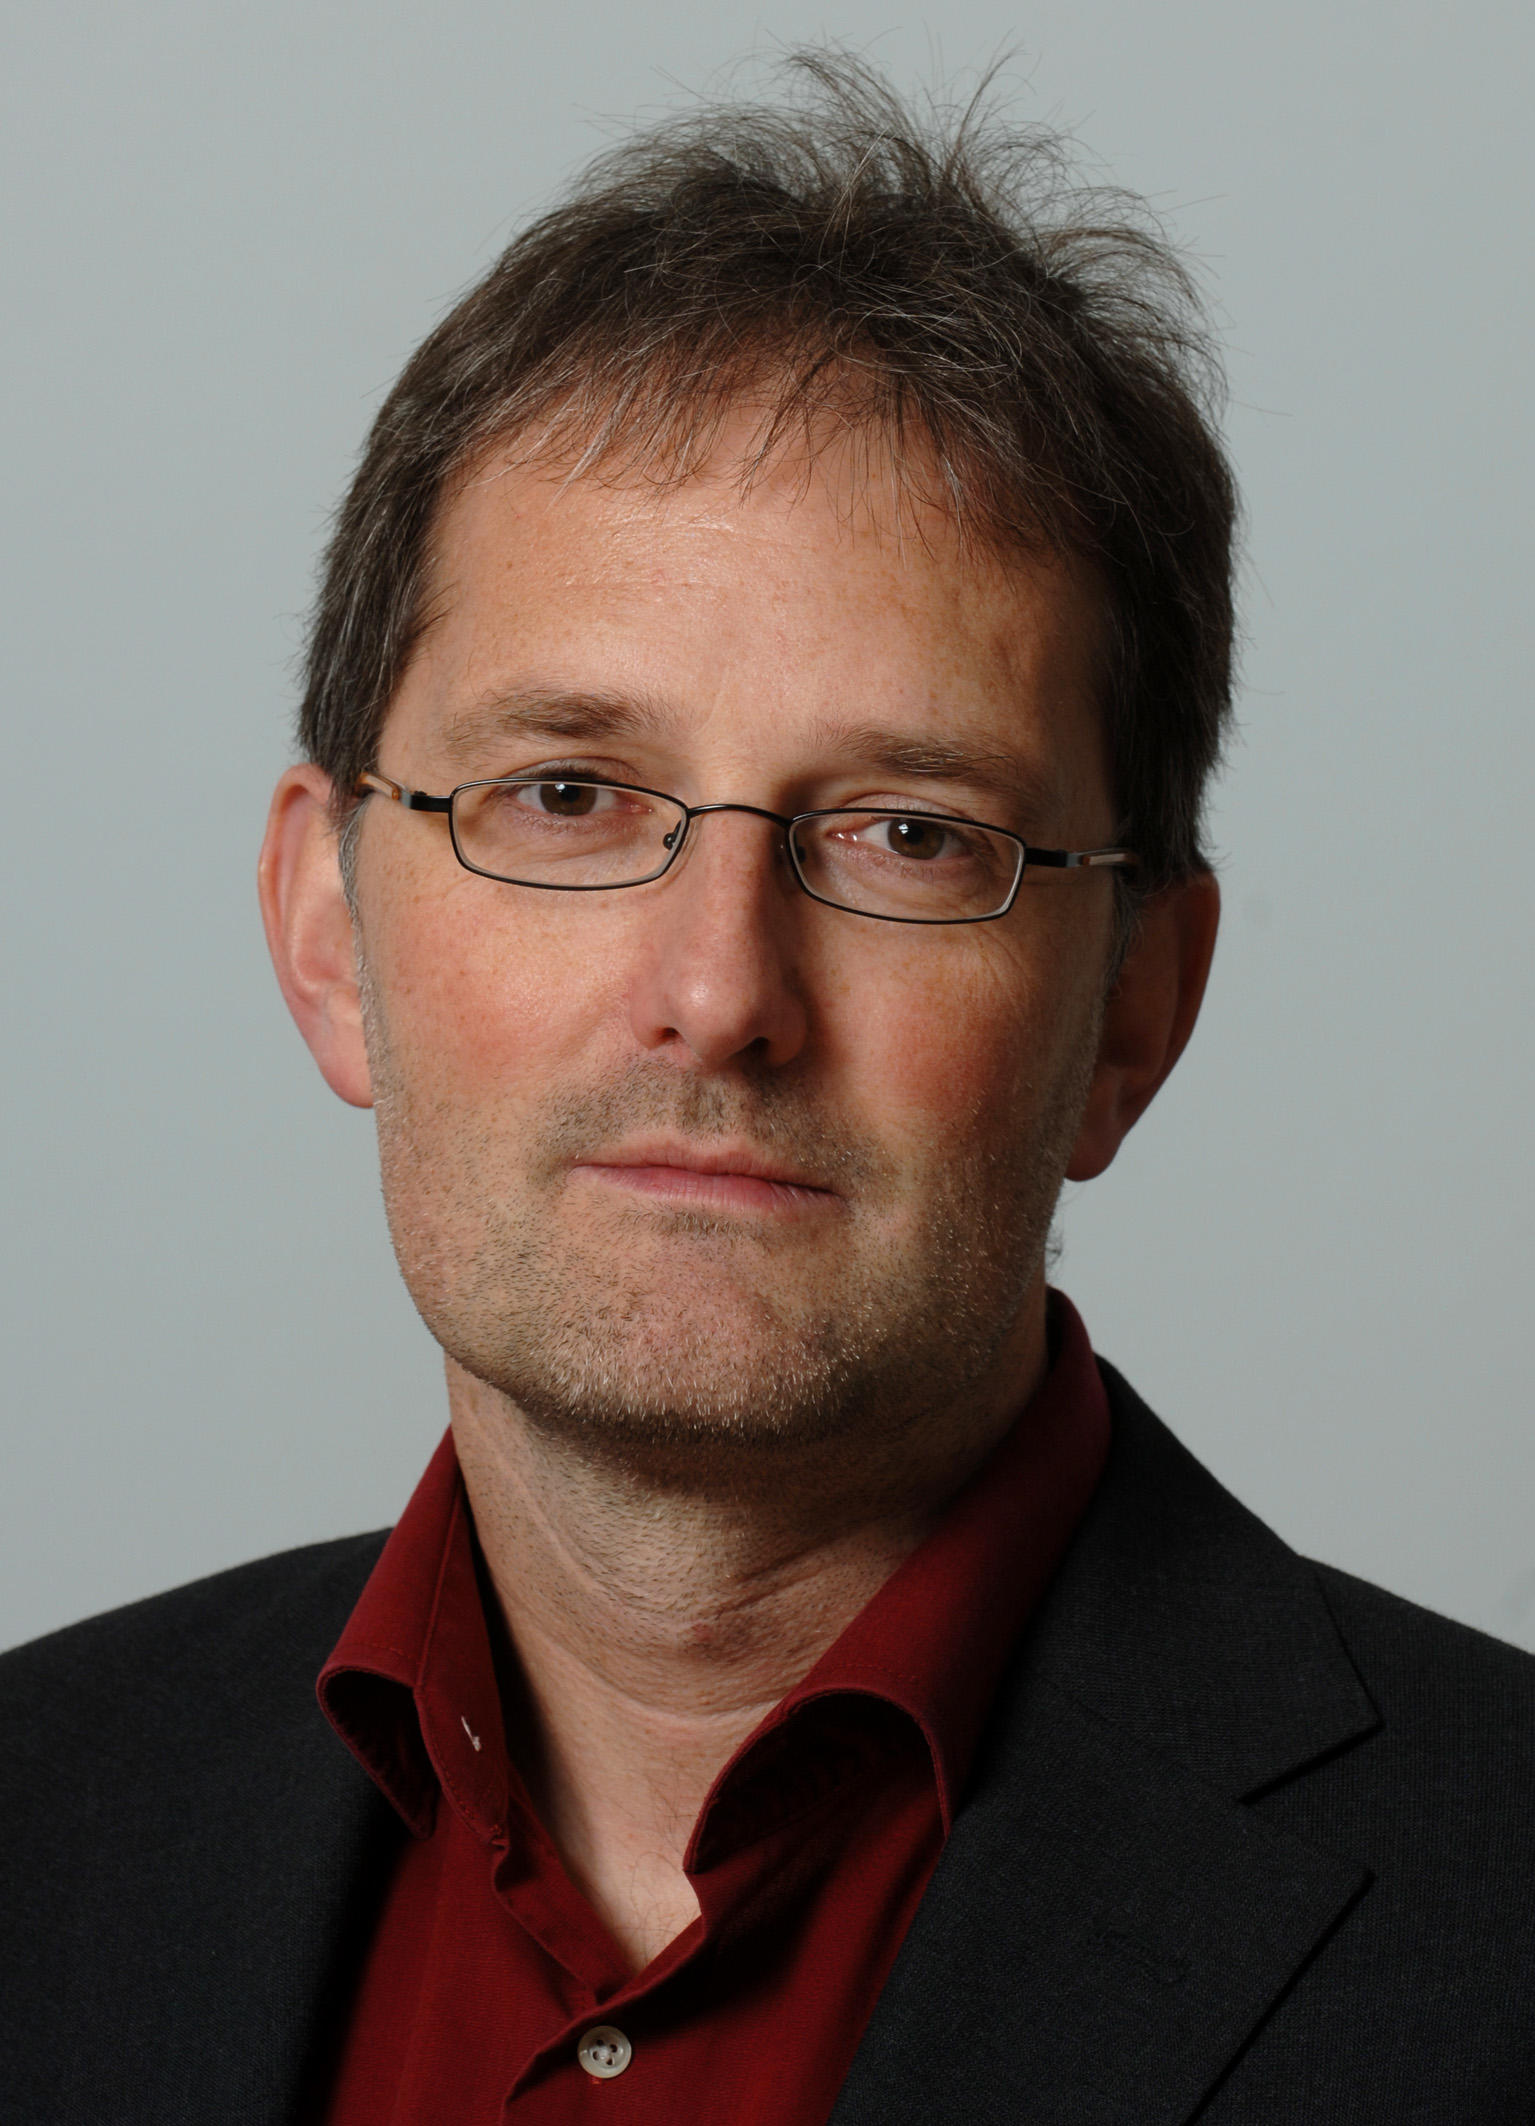 Christof Schütte is a professor in the Department of Mathematics and Computer Science at Freie Universität Berlin, the president of Zuse Institut Berlin (ZIB), and deputy spokesperson for Matheon.